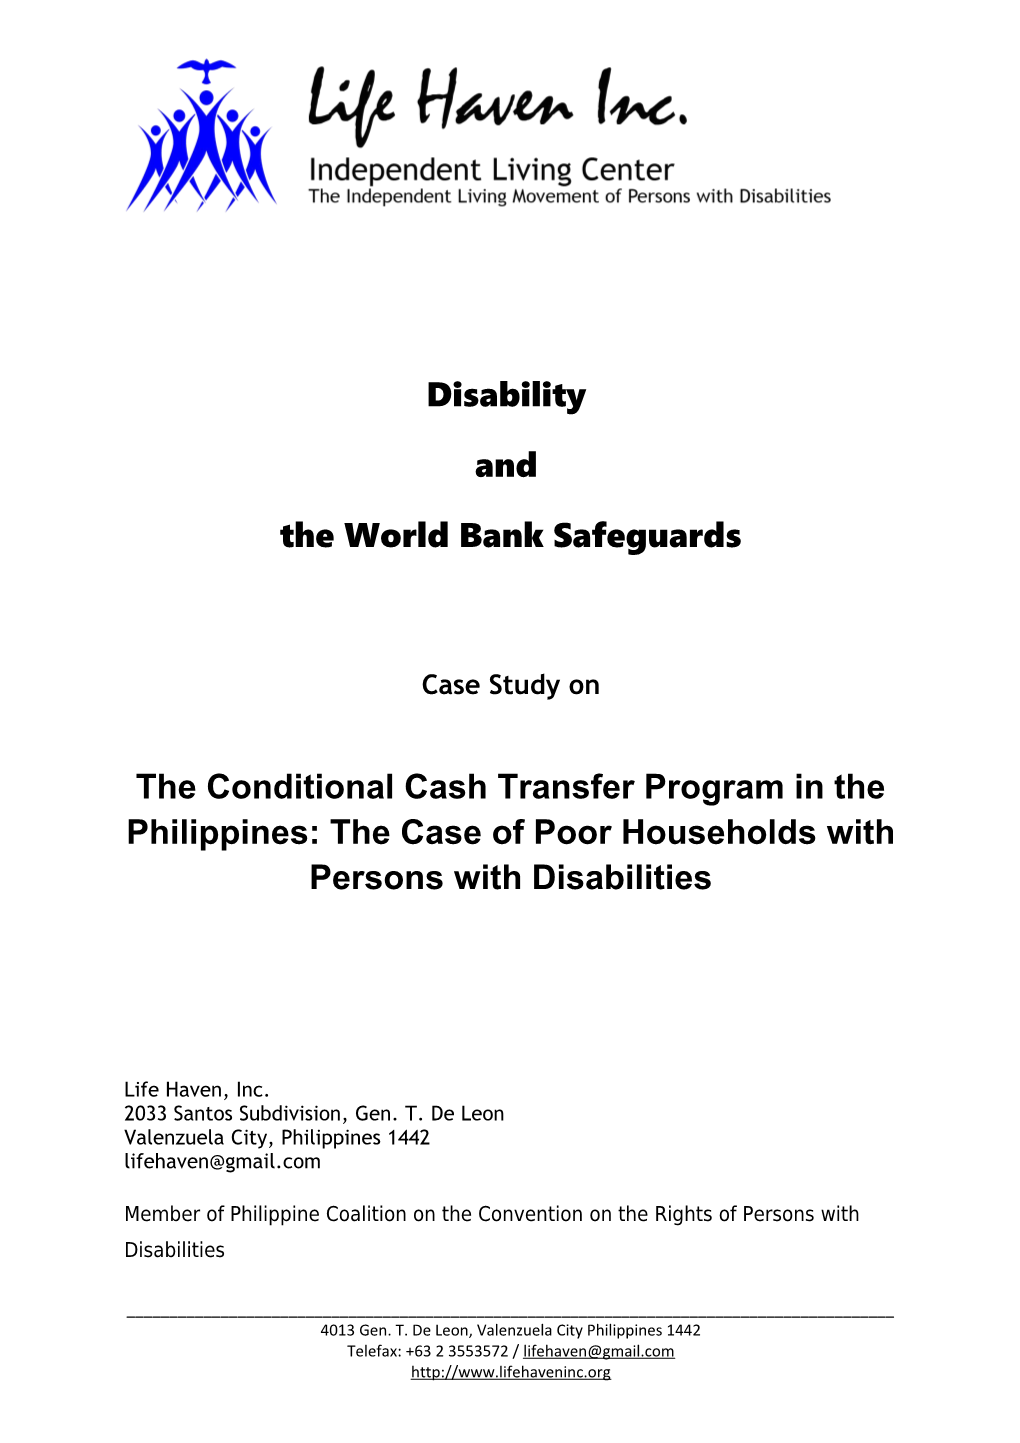 The World Bank Safeguards